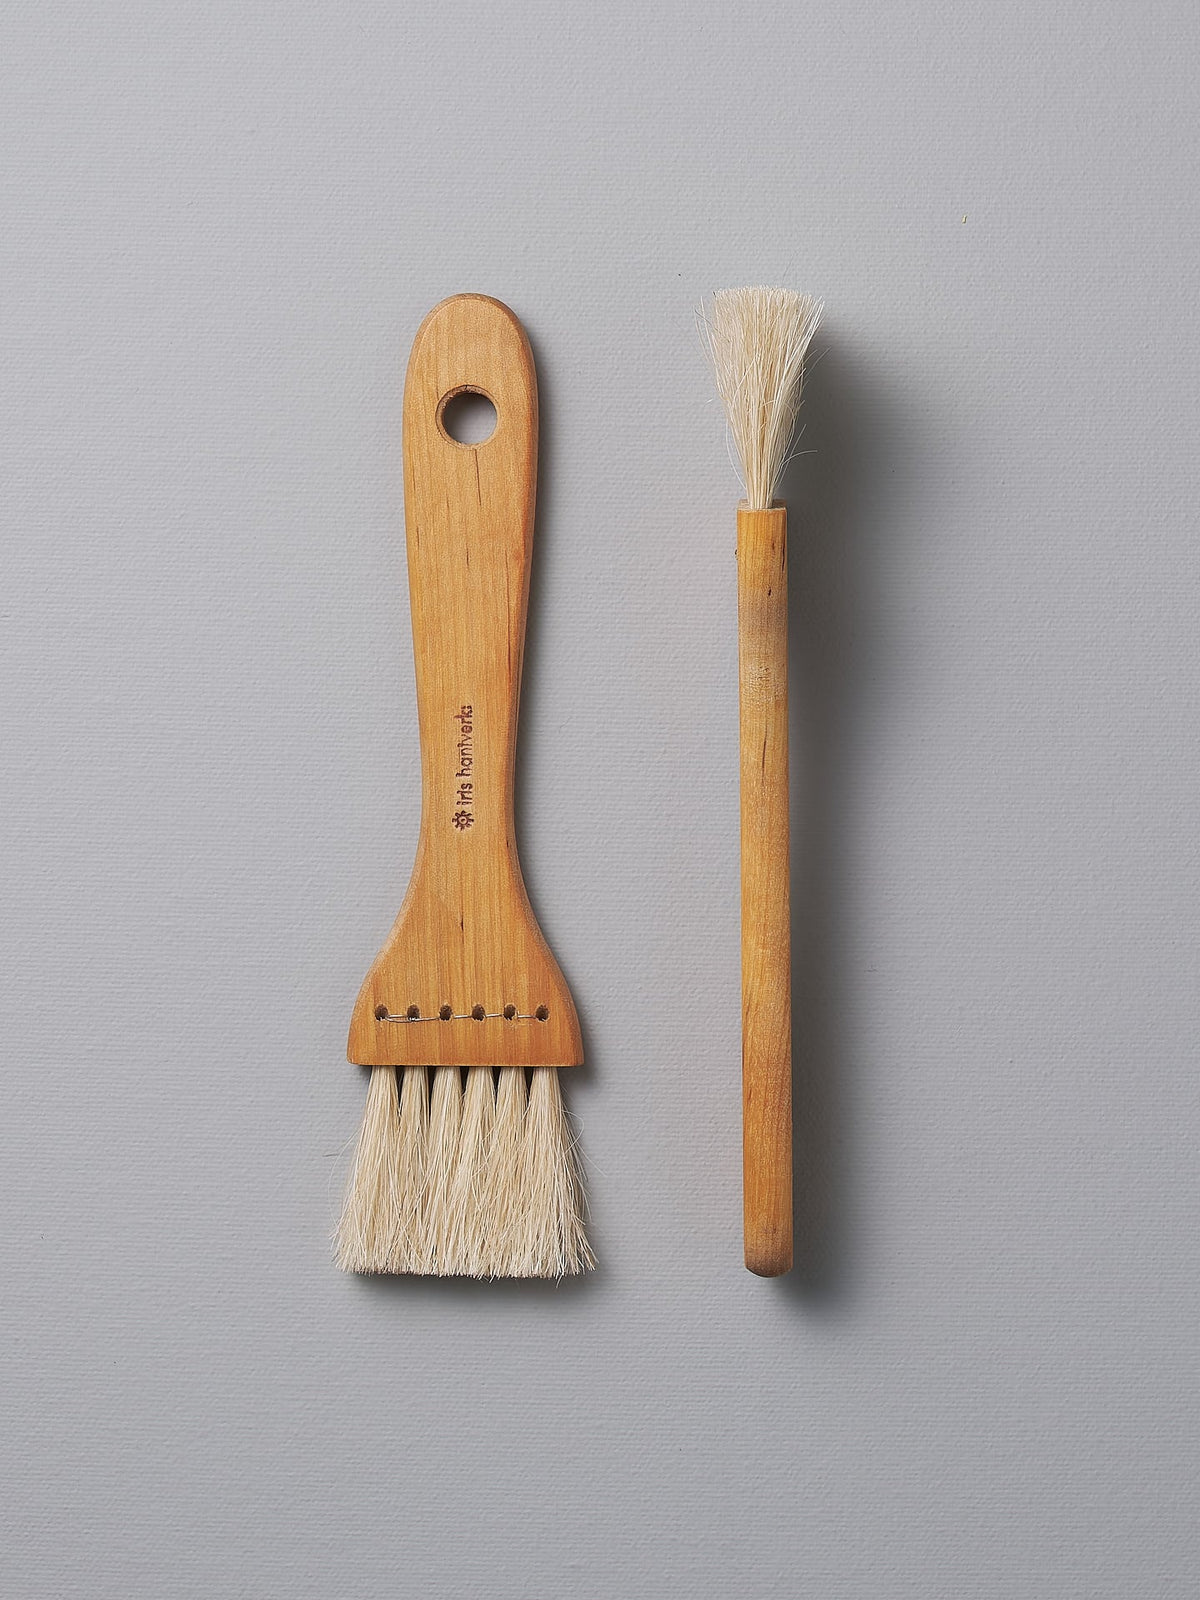 A Pastry Brush – Waxed Birch &amp; Horsehair and a Pastry Brush – Waxed Birch &amp; Horsehair next to each other (brand: Iris Hantverk).